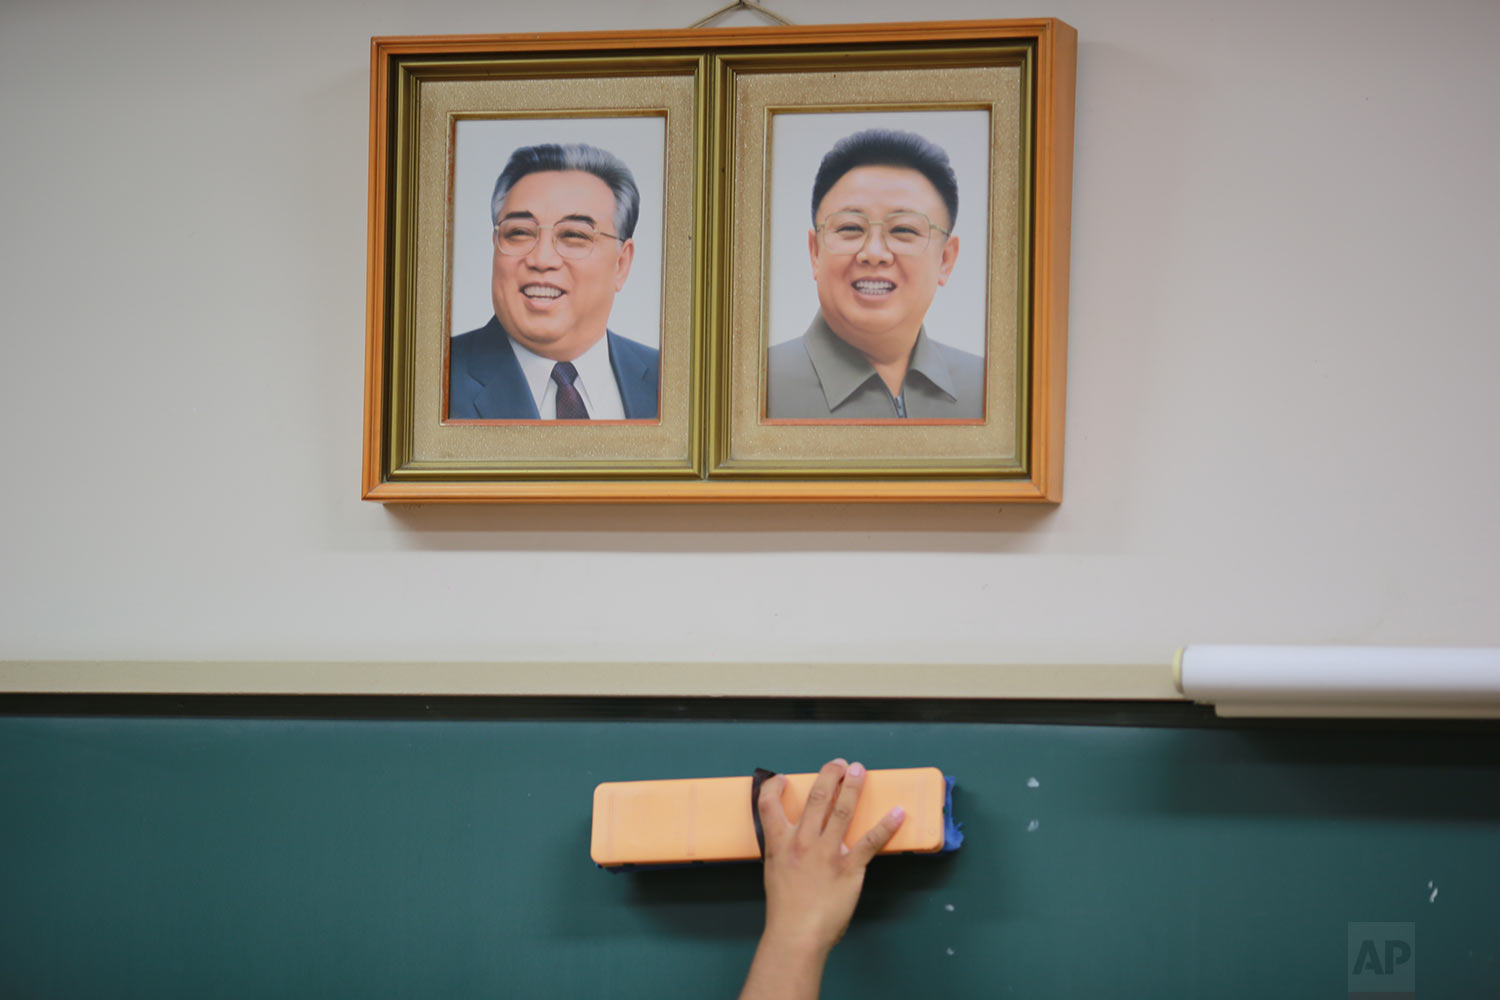  In this Sept. 26, 2017 photo, a student cleans the blackboard under the portraits of the late North Korean leaders Kim Il Sung and Kim Jong Il hanging on the classroom wall at a Tokyo Korean high school in Tokyo. (AP Photo/Eugene Hoshiko) 